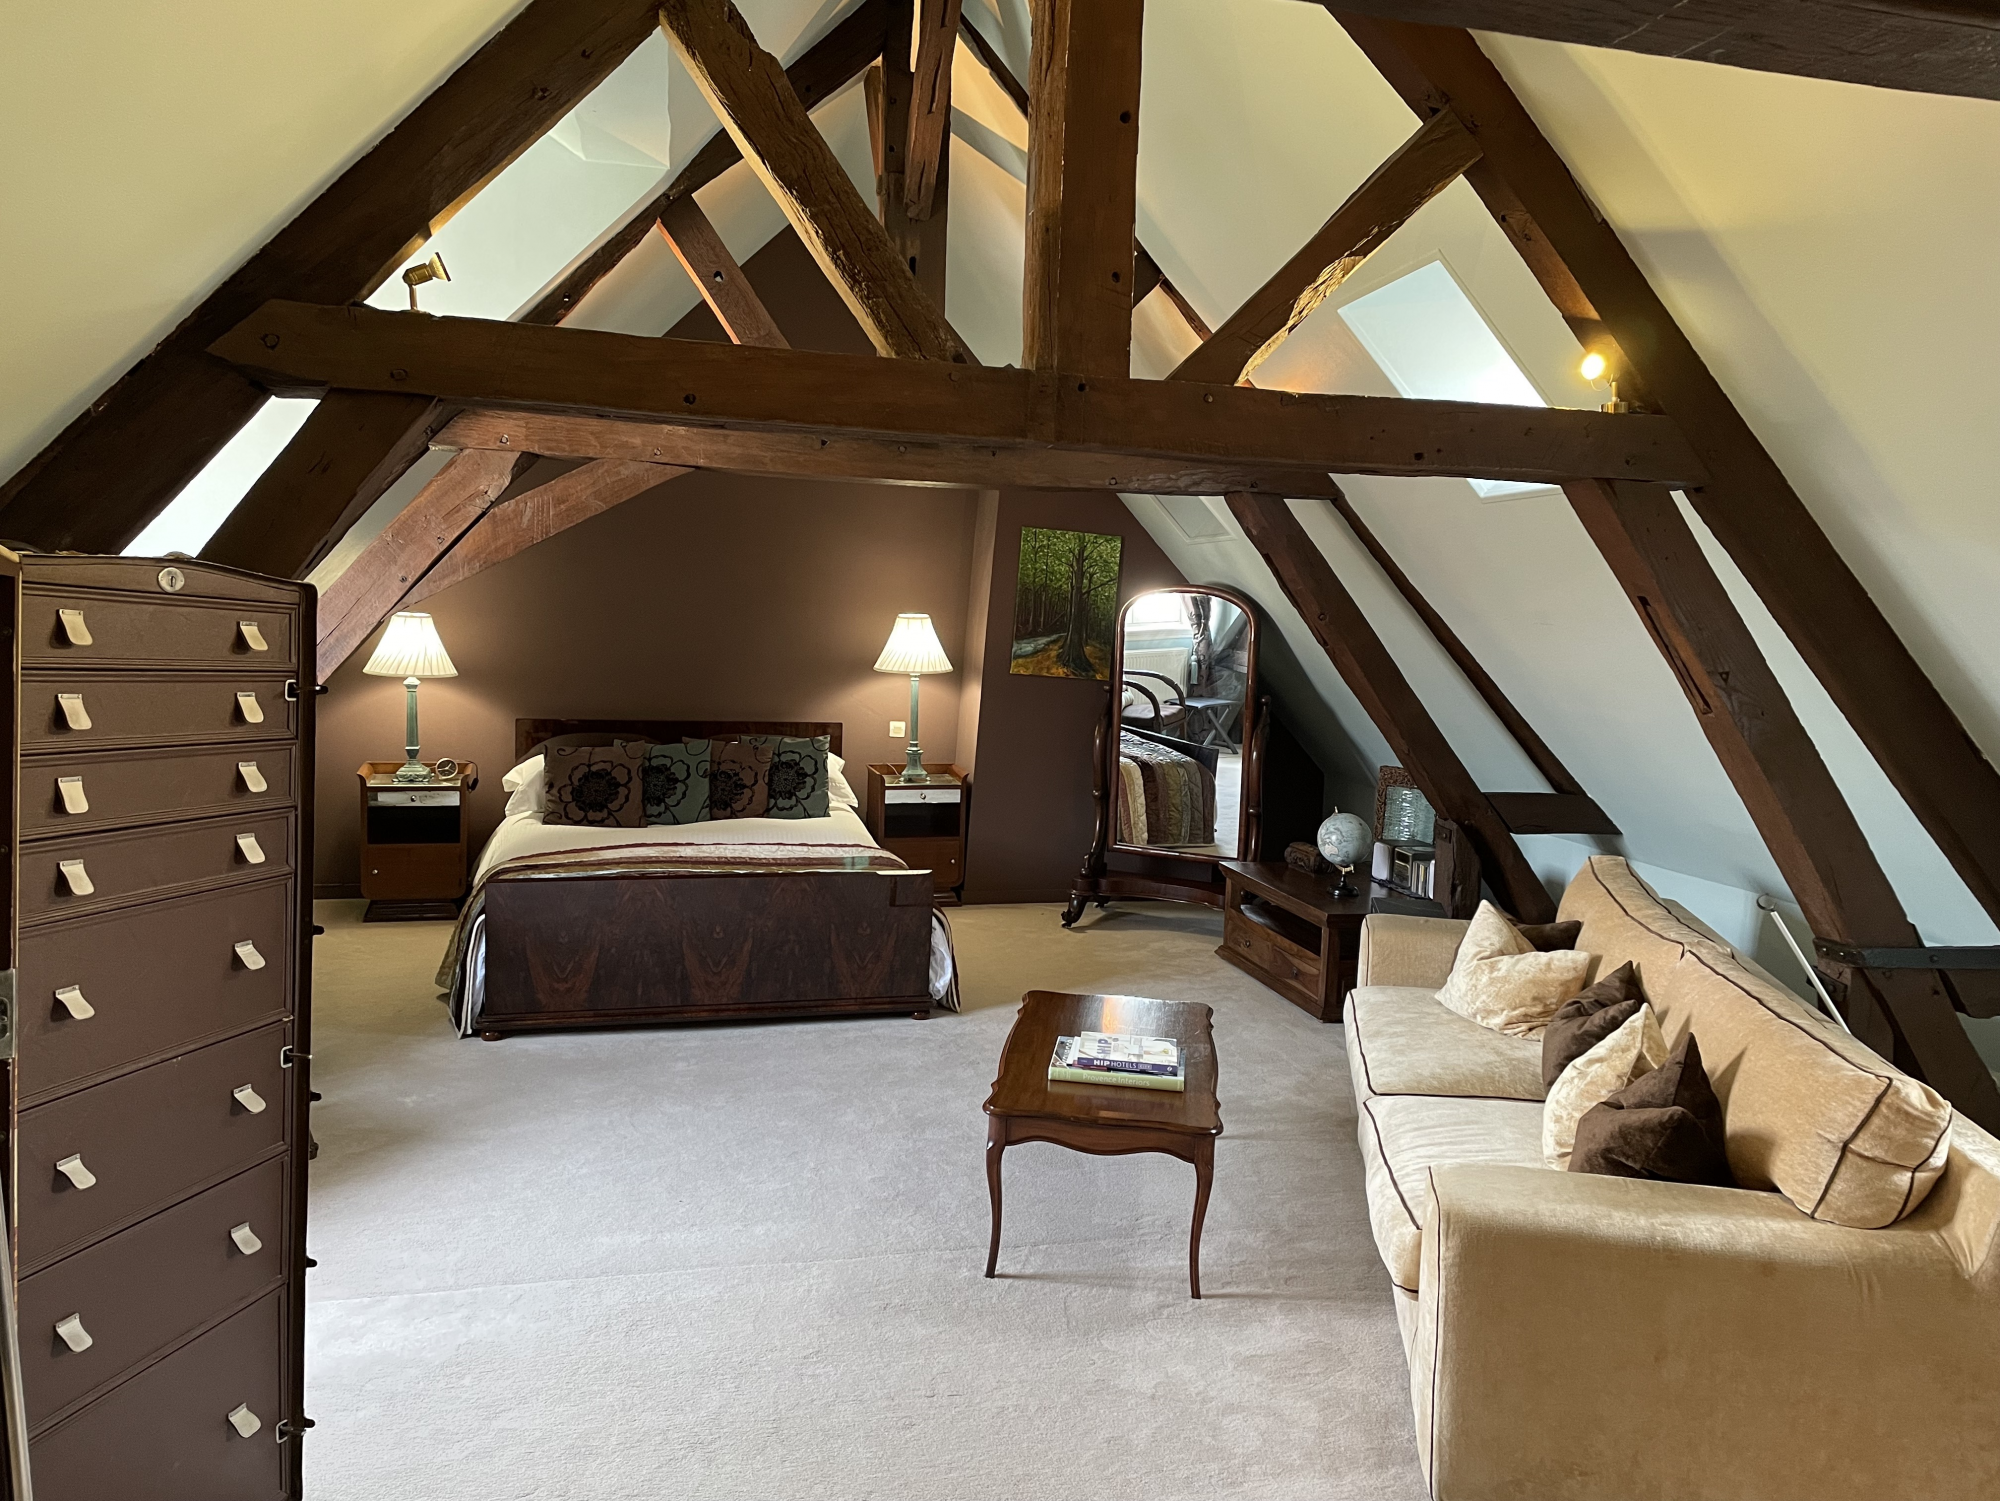 The Macassar suite, Le Macassar Bed and Breakfast